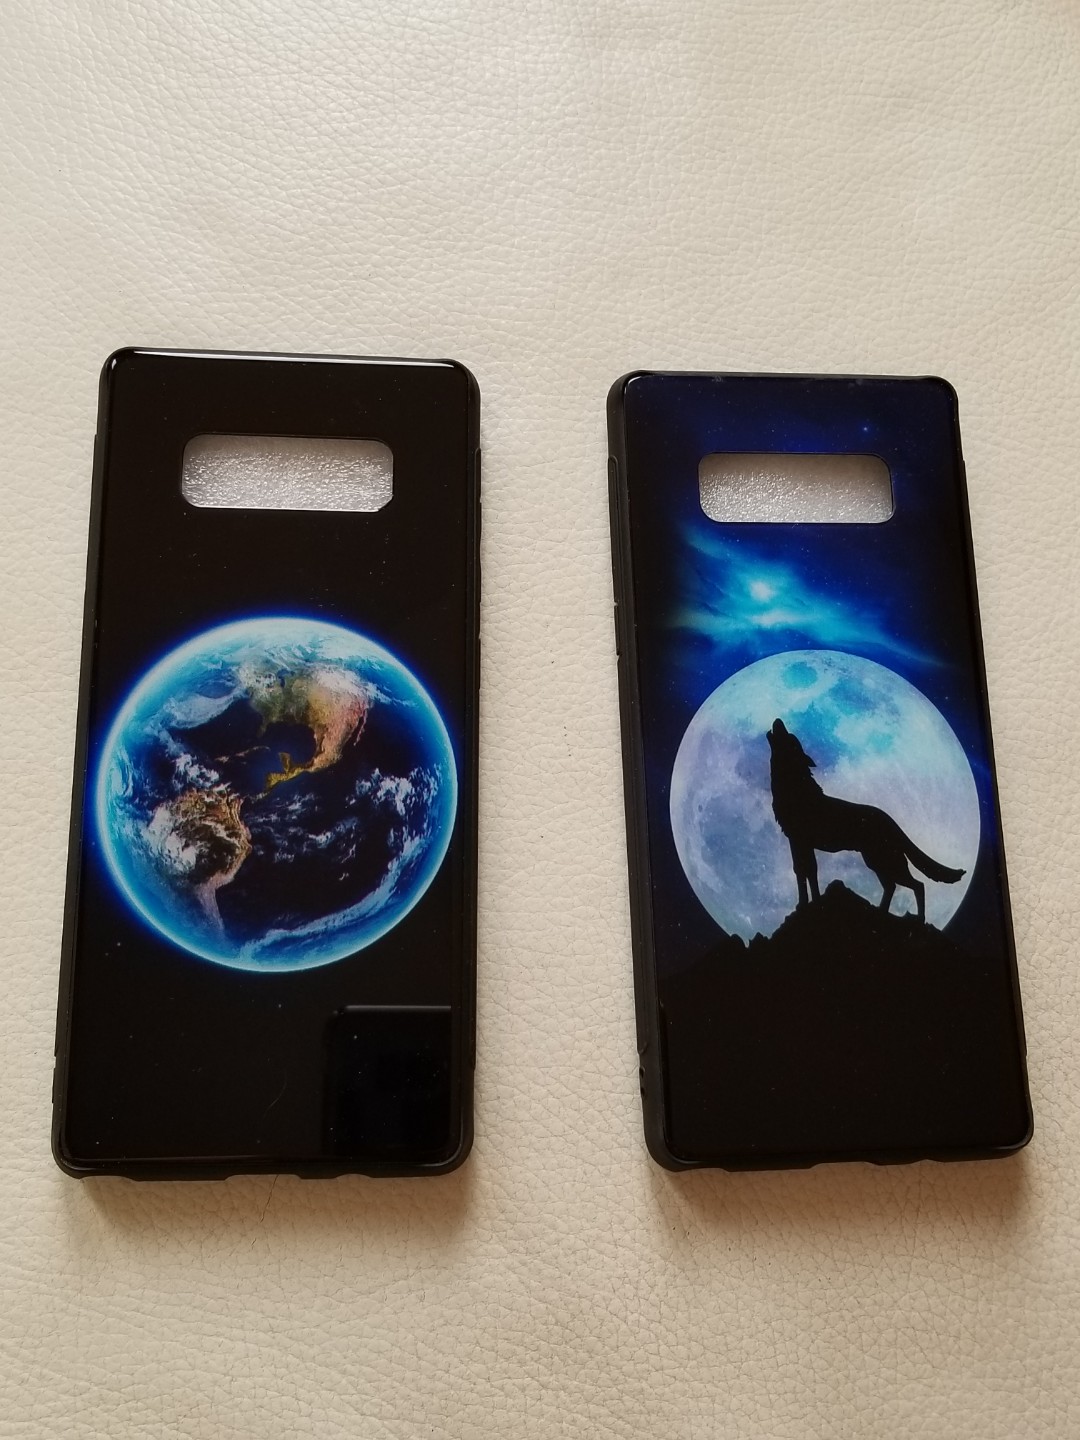 Mobile phone cases and ring holder